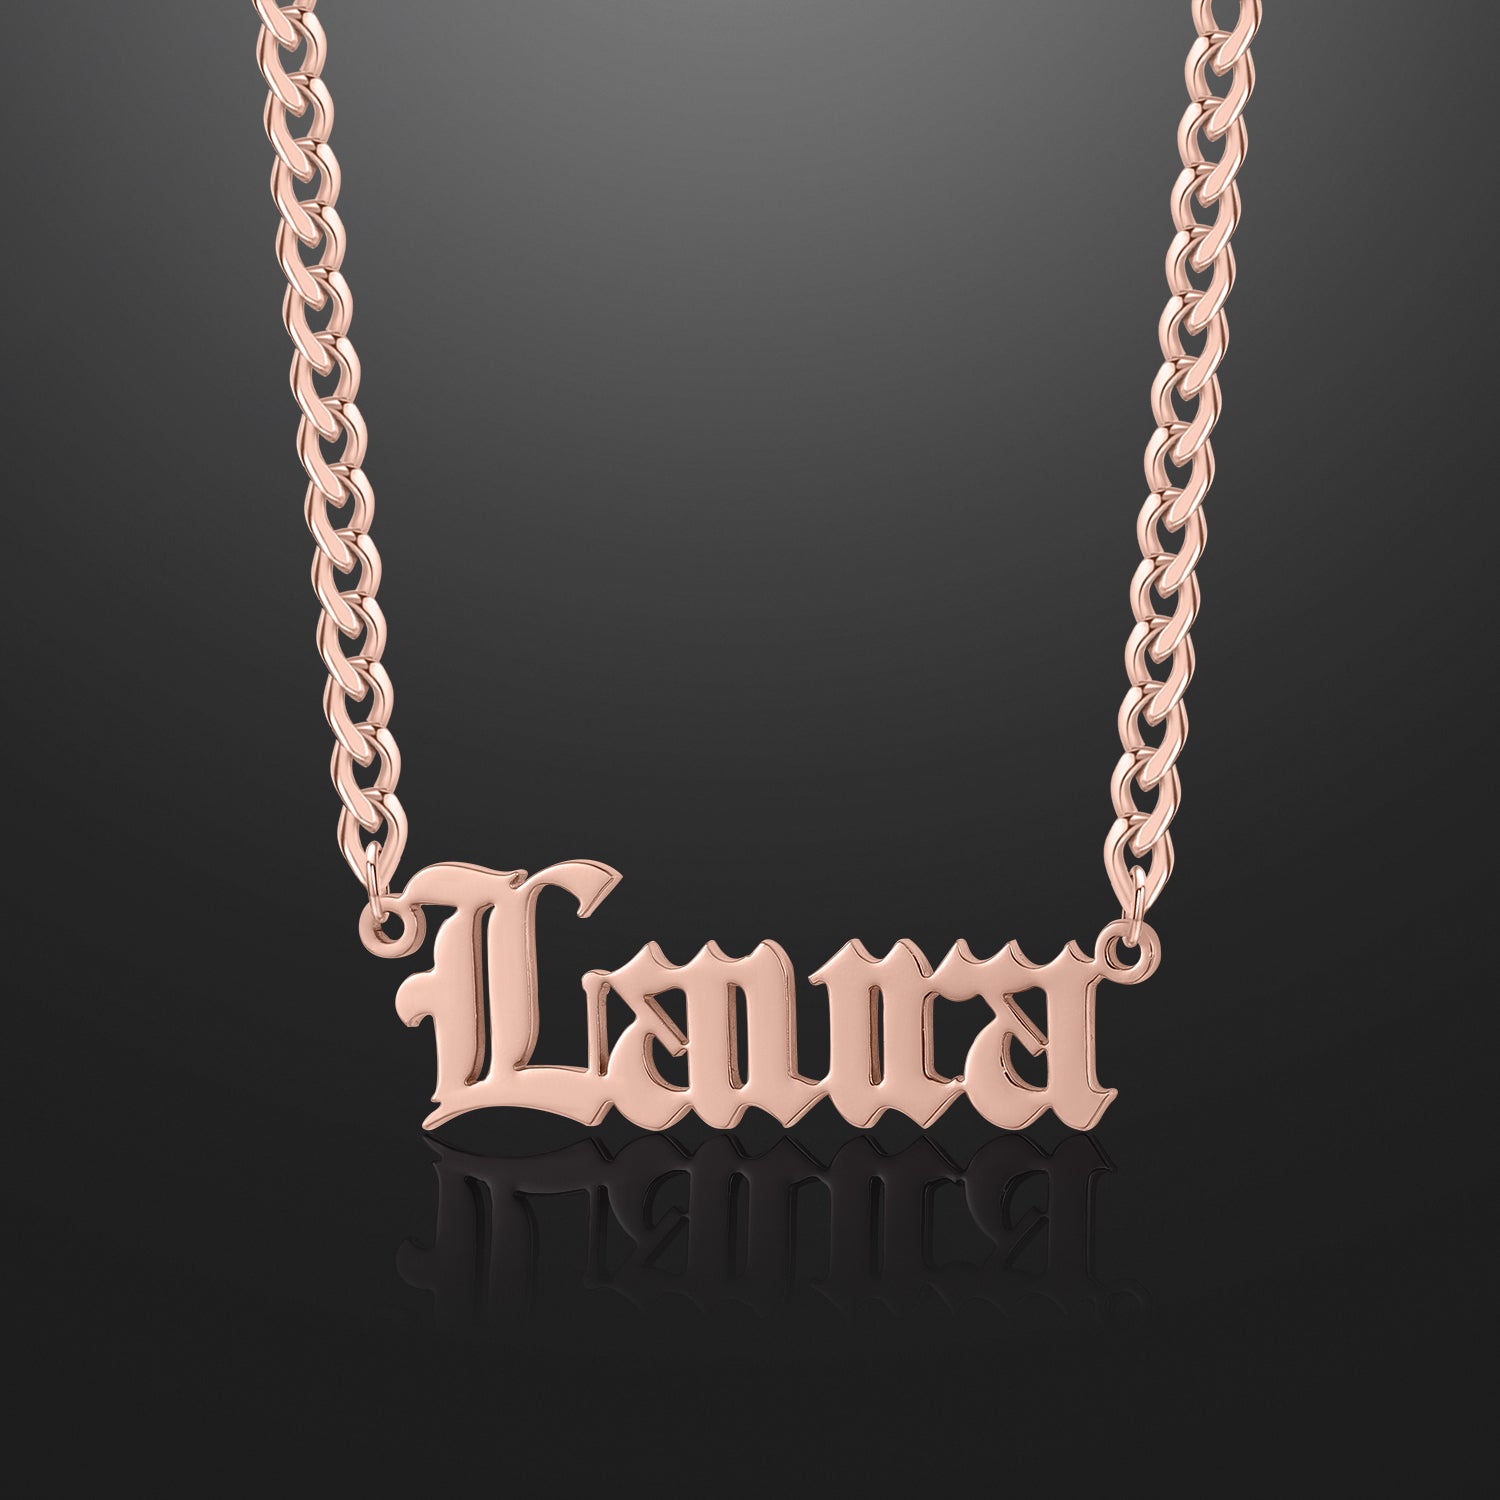 Kids Gothic Name Necklace w/ Cuban Chain